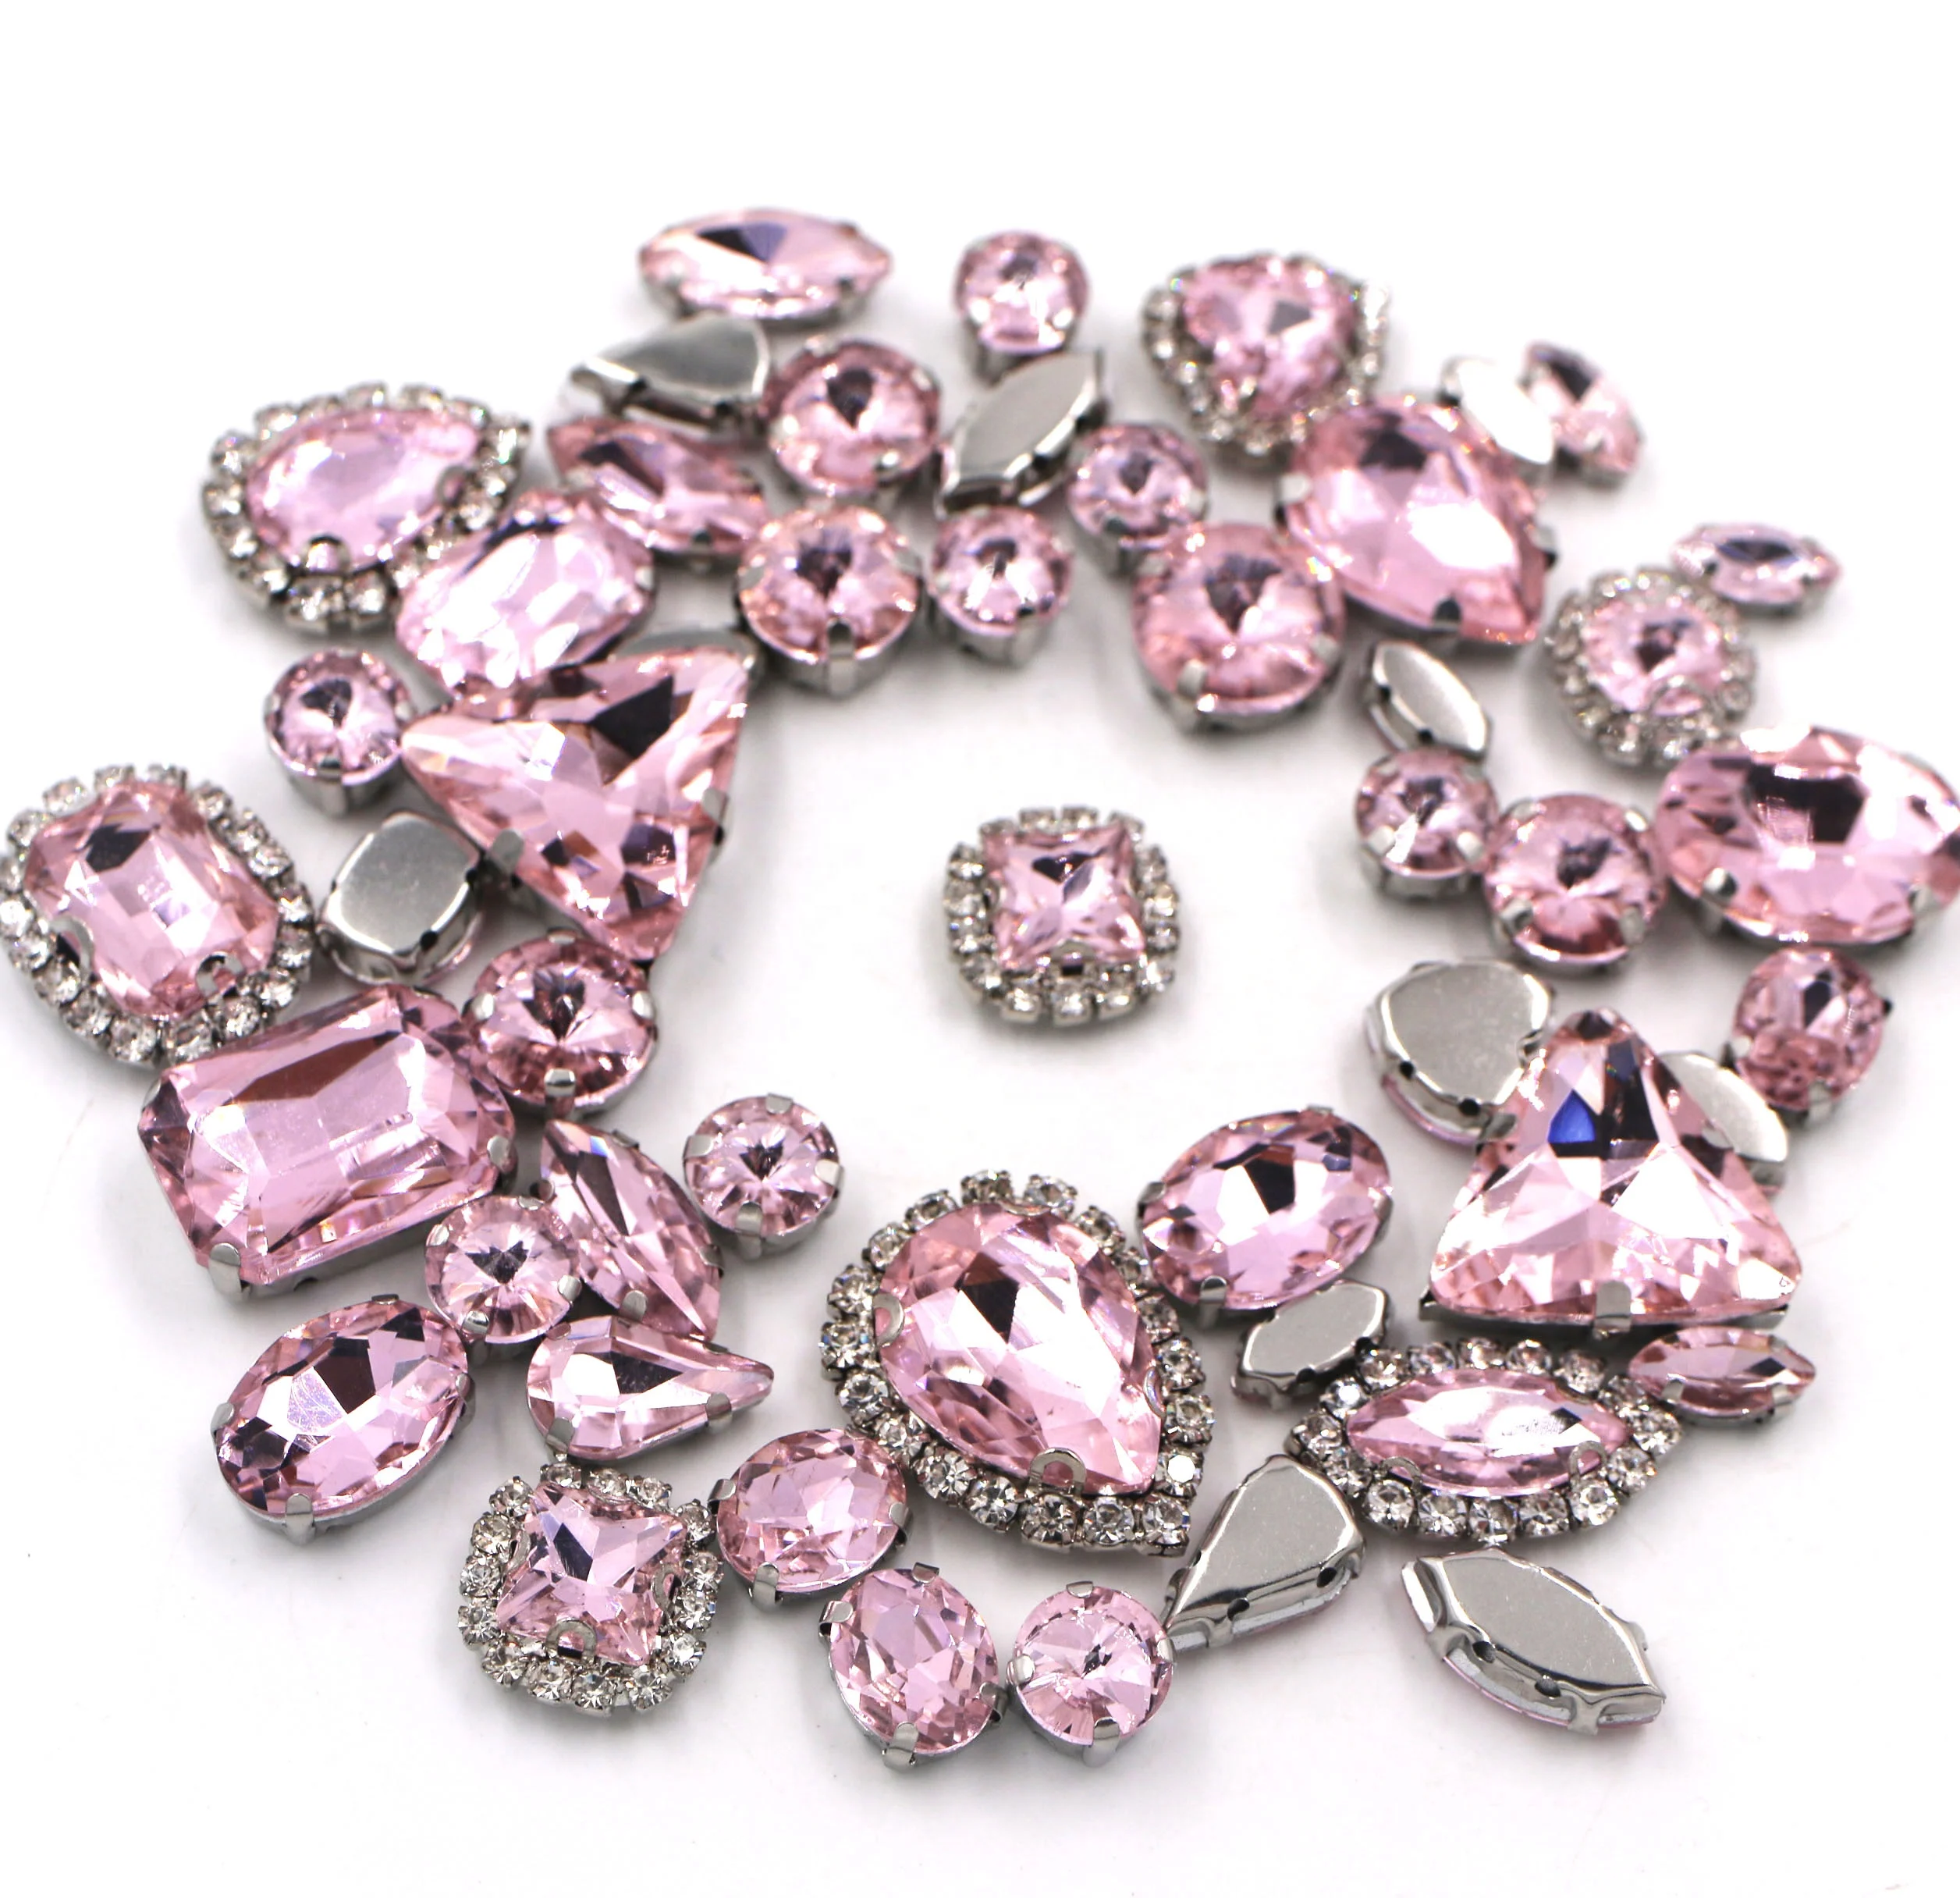 Wholesale Wholesale Pink Mixed Crystal Buckle Rhinestones With Silver From m.alibaba.com